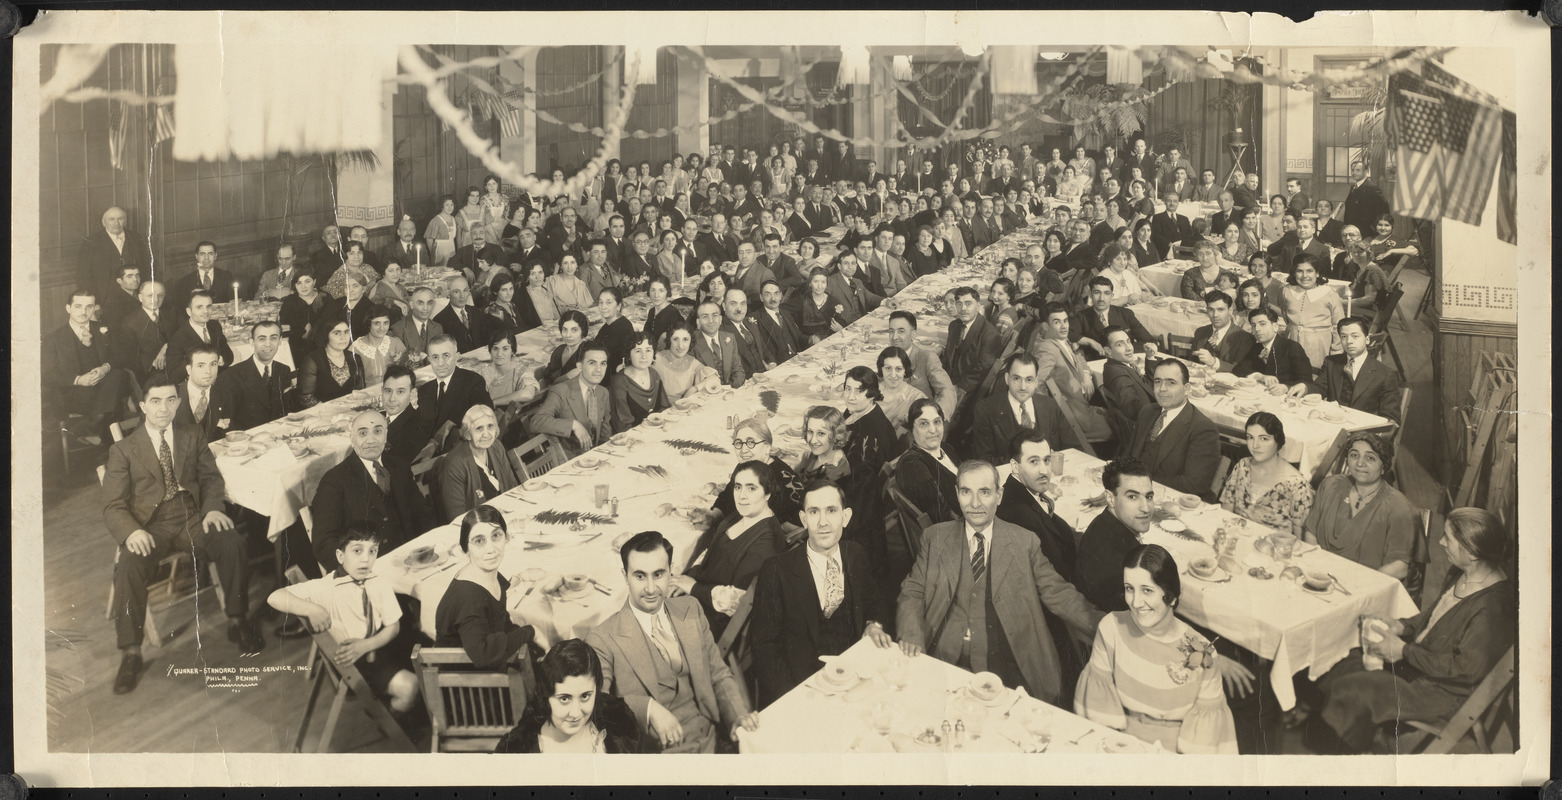 Unidentified group at a banquet